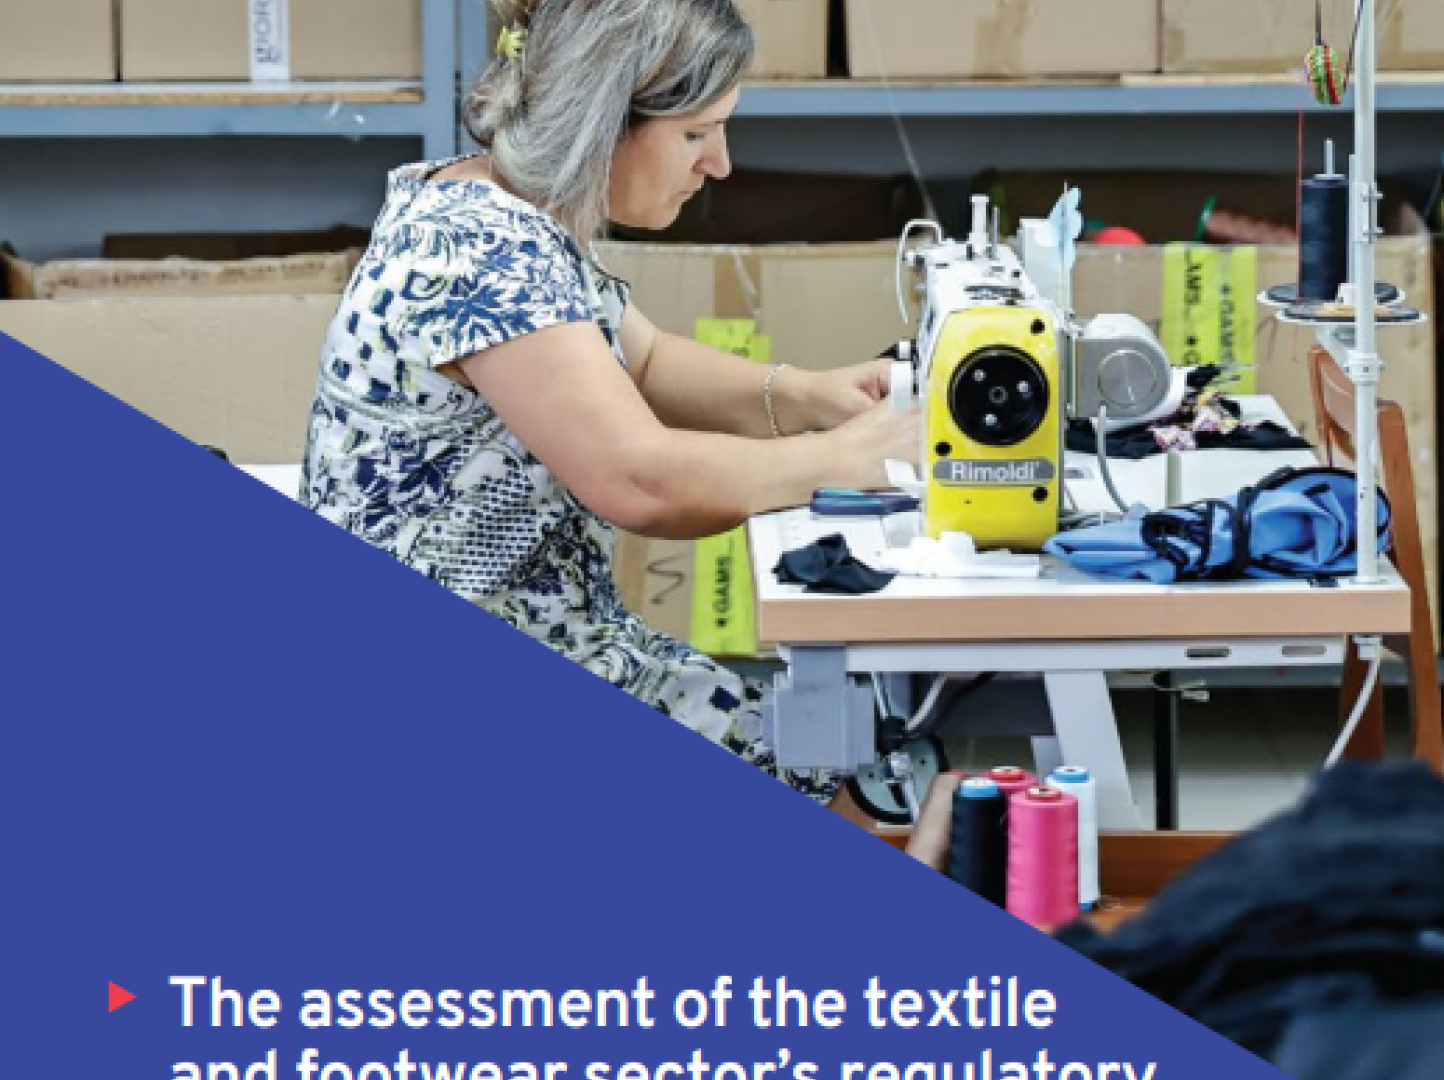 Cover of the "The Assessment of the textile and footwear sector's regulatory alignment with European Union" publication